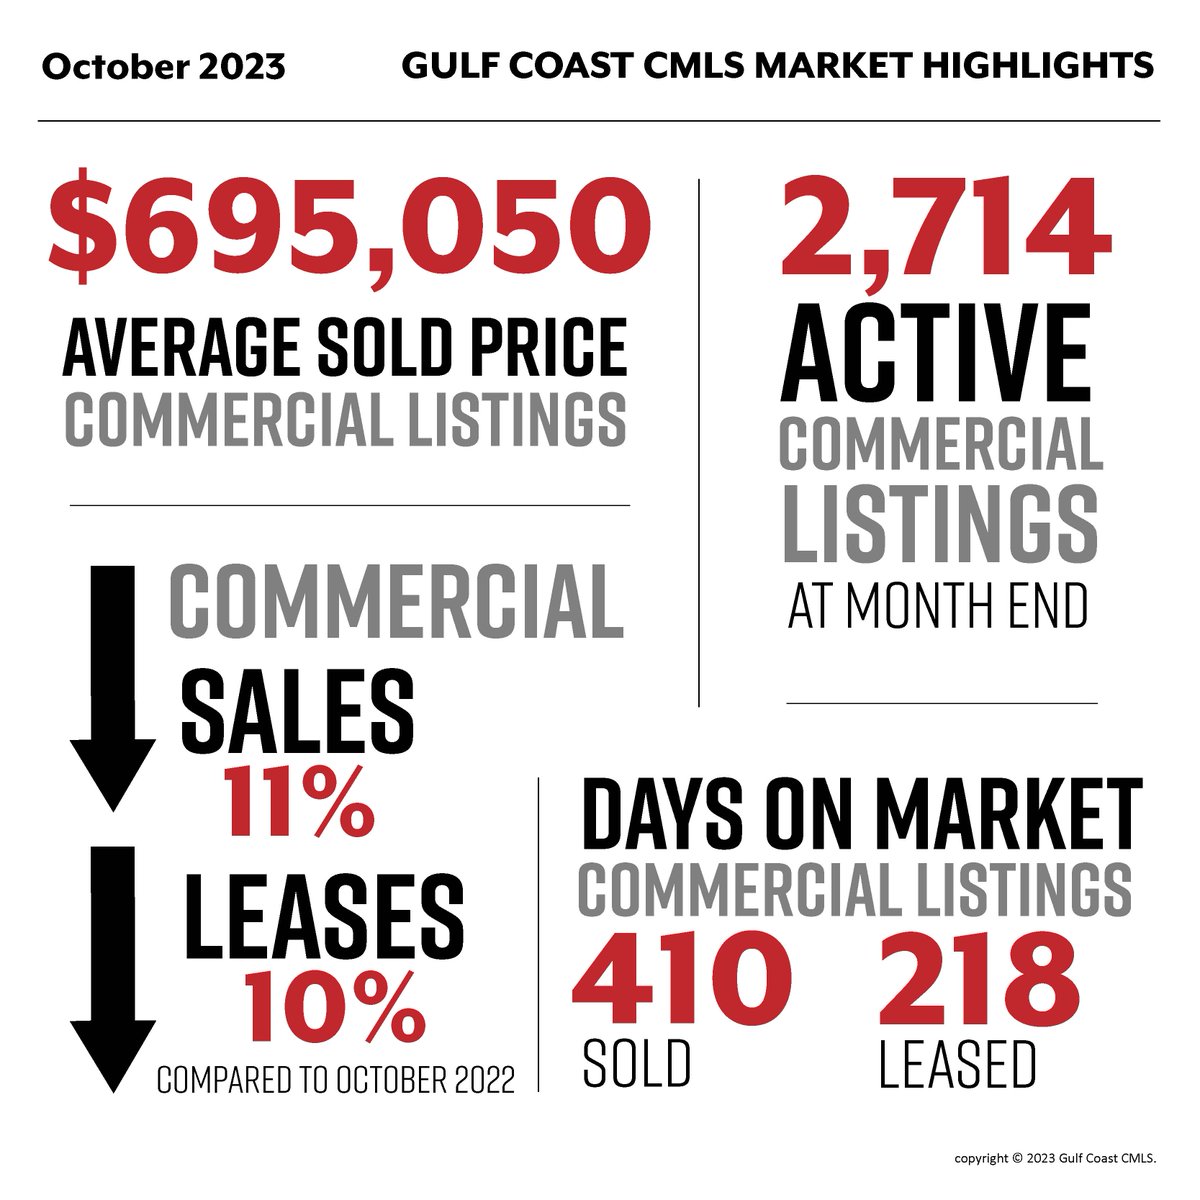 October highlights from #PensacolaMLS for the Residential, Rental, and Commercial markets. 📬
#PensacolaRealEstate #PensacolaREALTORS #PensacolaREALTOR